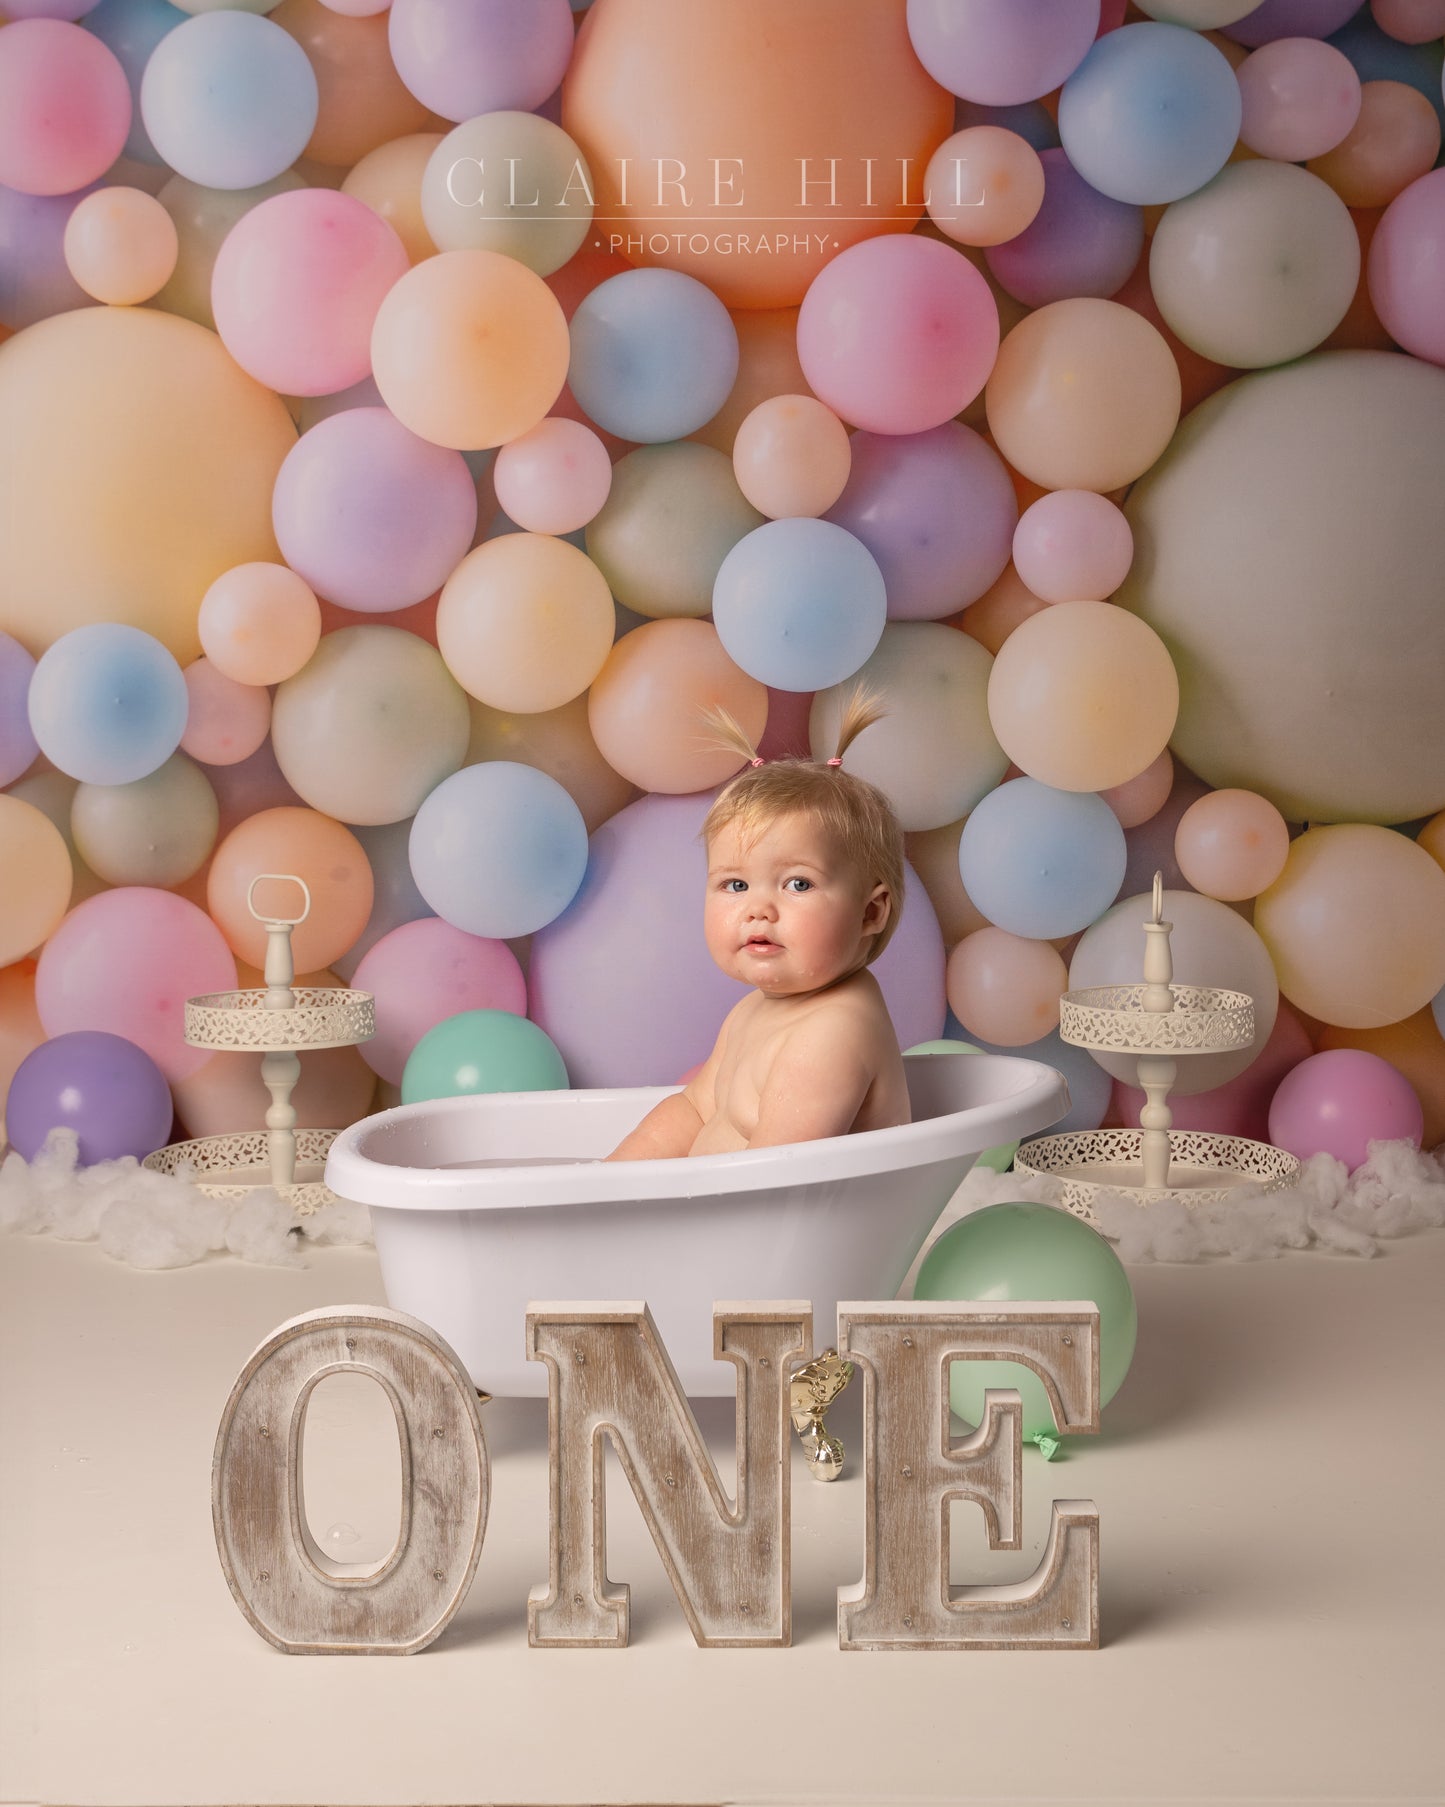 Fun & Professional Babies Cake Smash and splash photo shoot with Claire Hill Photography based in Wolverhampton West Midlands near Birmingham, Shropshire, Staffordshire & Telford 